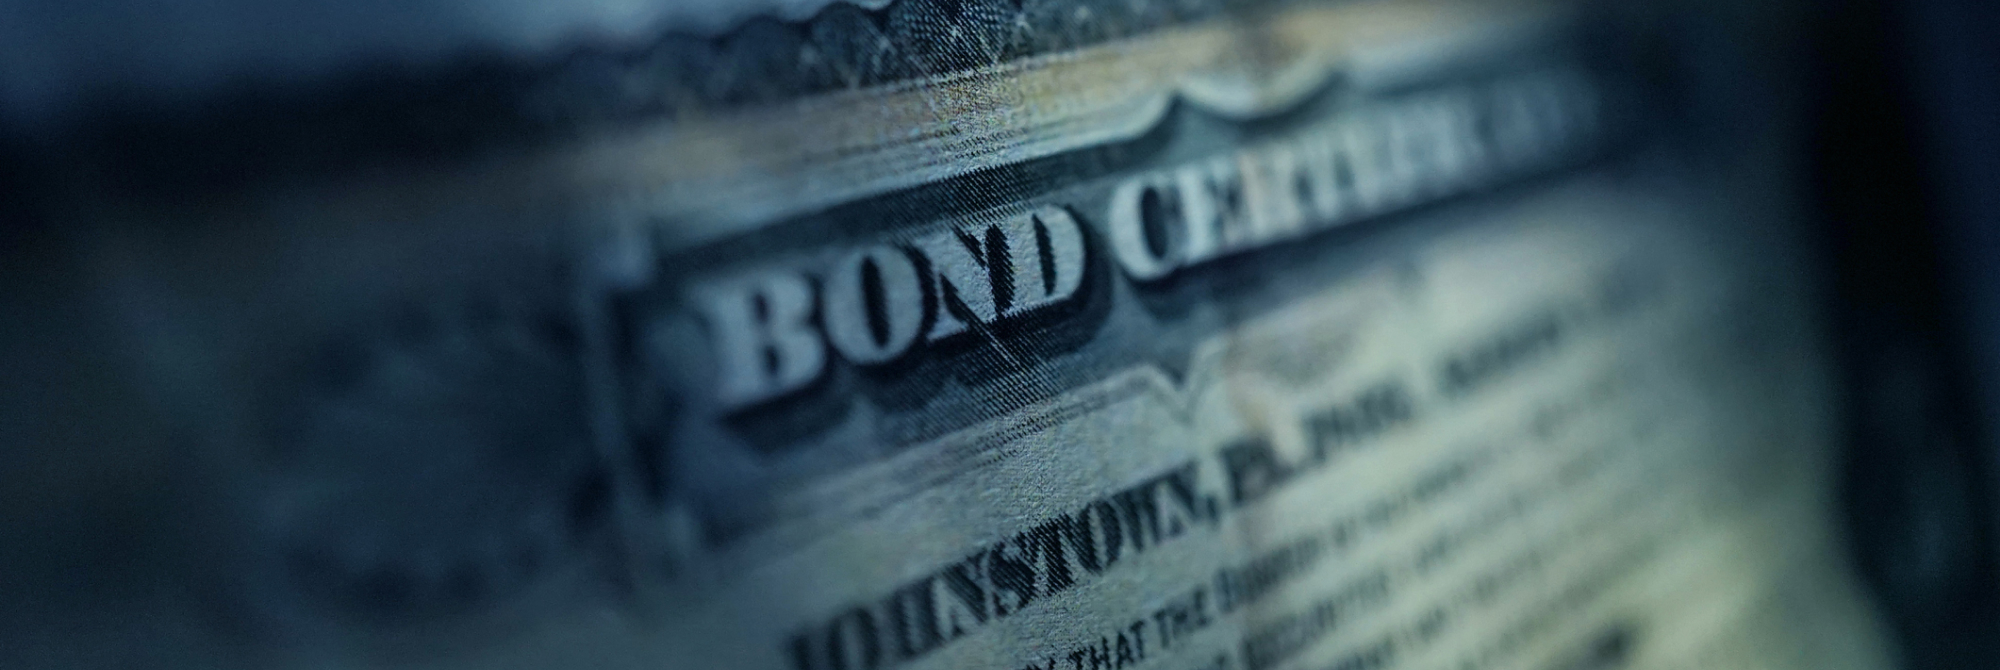 Grow your wealth: Window of opportunity for Emerging Market bonds?